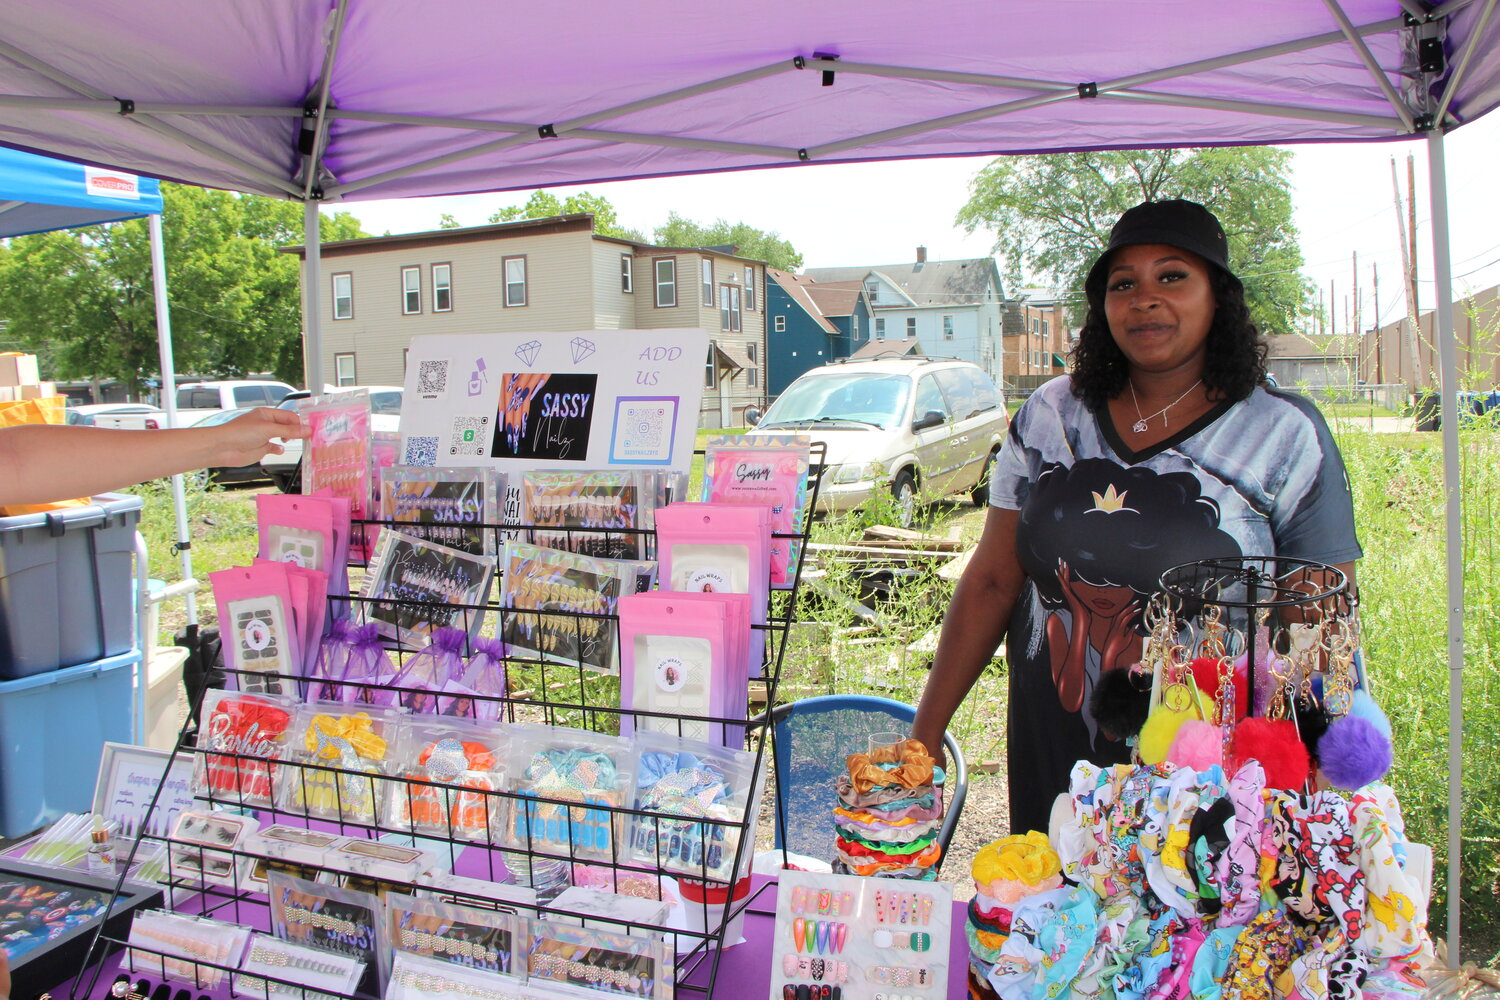 Monday, June 19, a Sassy Nails vendor sells press on nails and other beauty items at the Soul of the Southside festival.